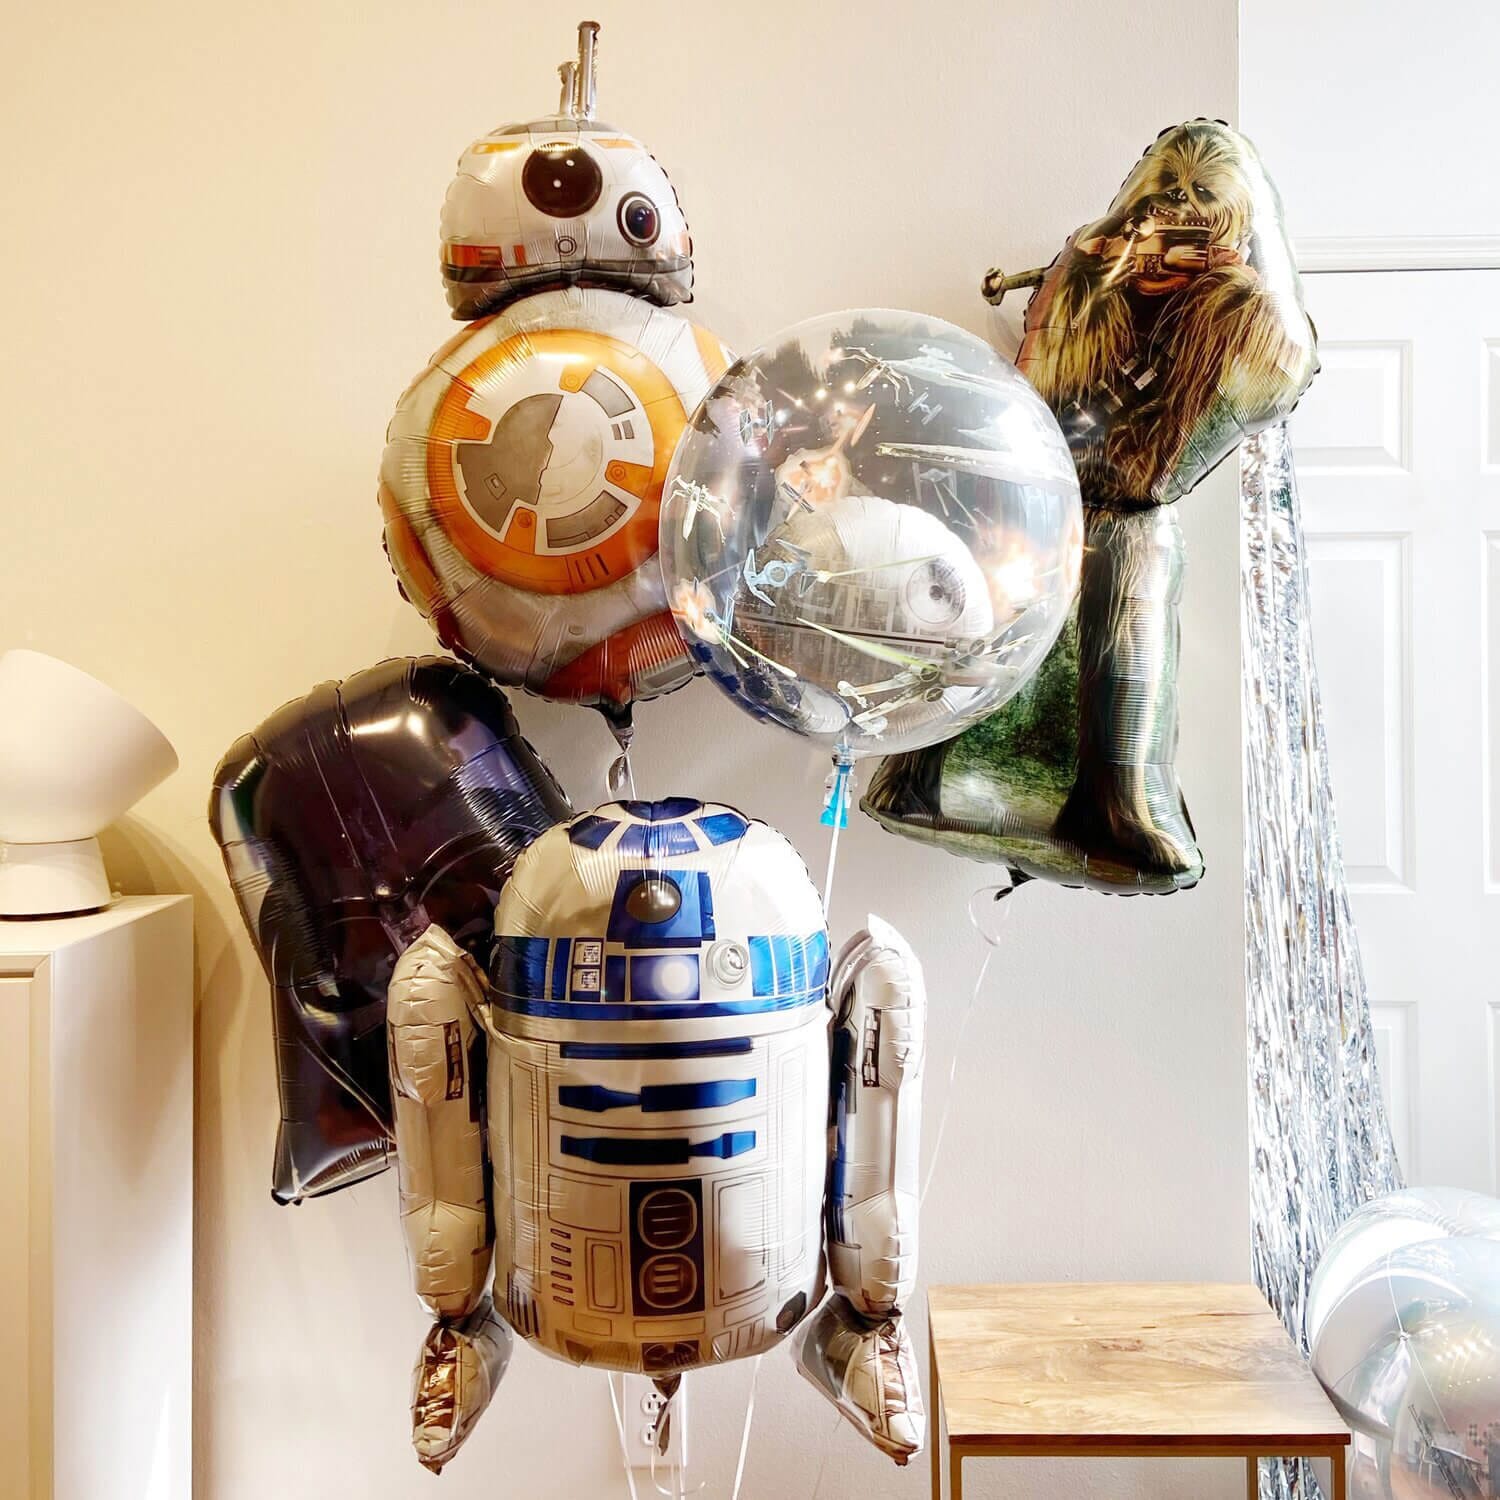 Oversized helium bouquet with Chewbacca, Darth Vader, Death Star Galaxy, R2-D2, and BB8 helium balloons from Just Peachy in Little Rock, Arkansas.